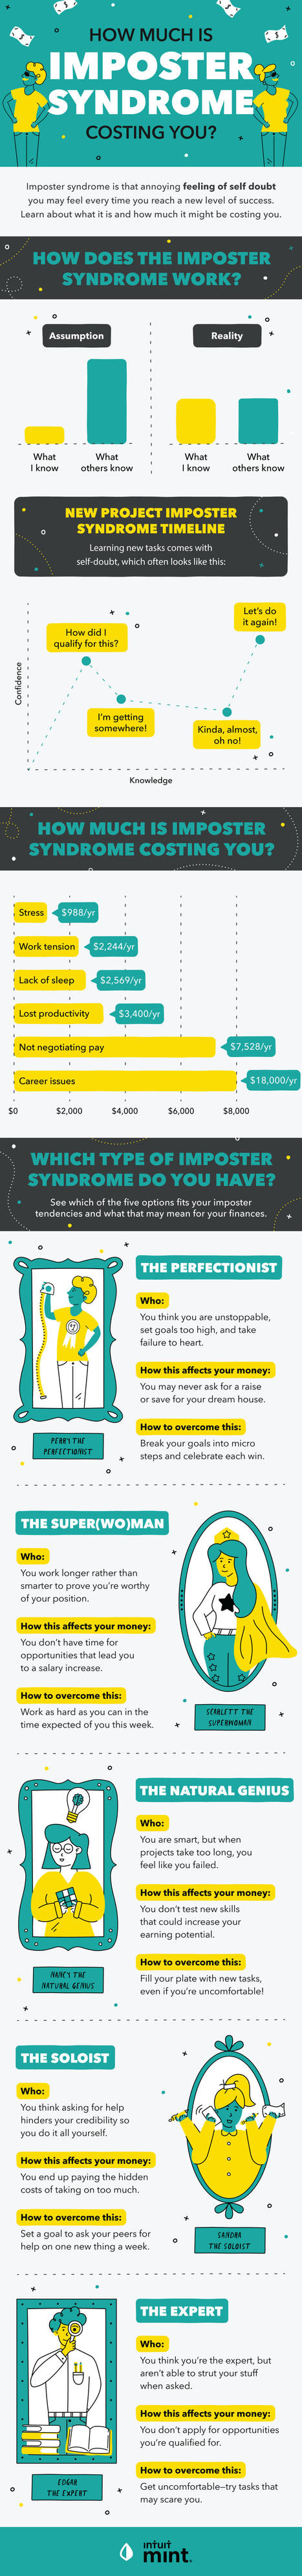 How Imposter Syndrome Costs You Money  | 212 Careers | Scoop.it